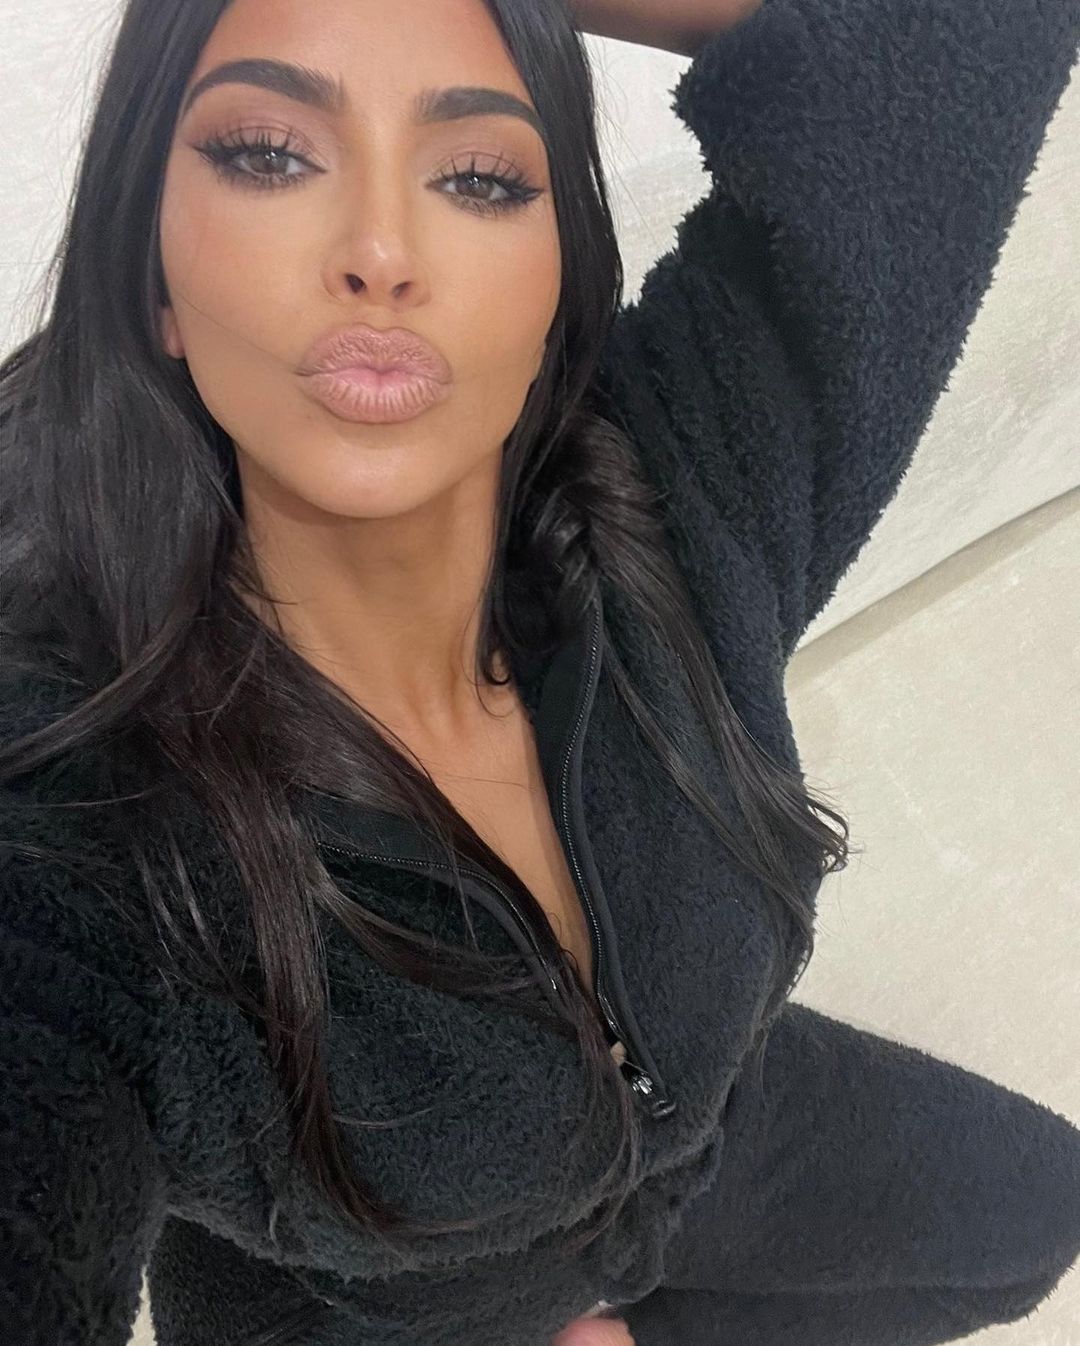 Meet Apprentice star Rochelle Anthony dubbed ‘Kim Kardashian of business’ – with eye-popping Instagram snaps